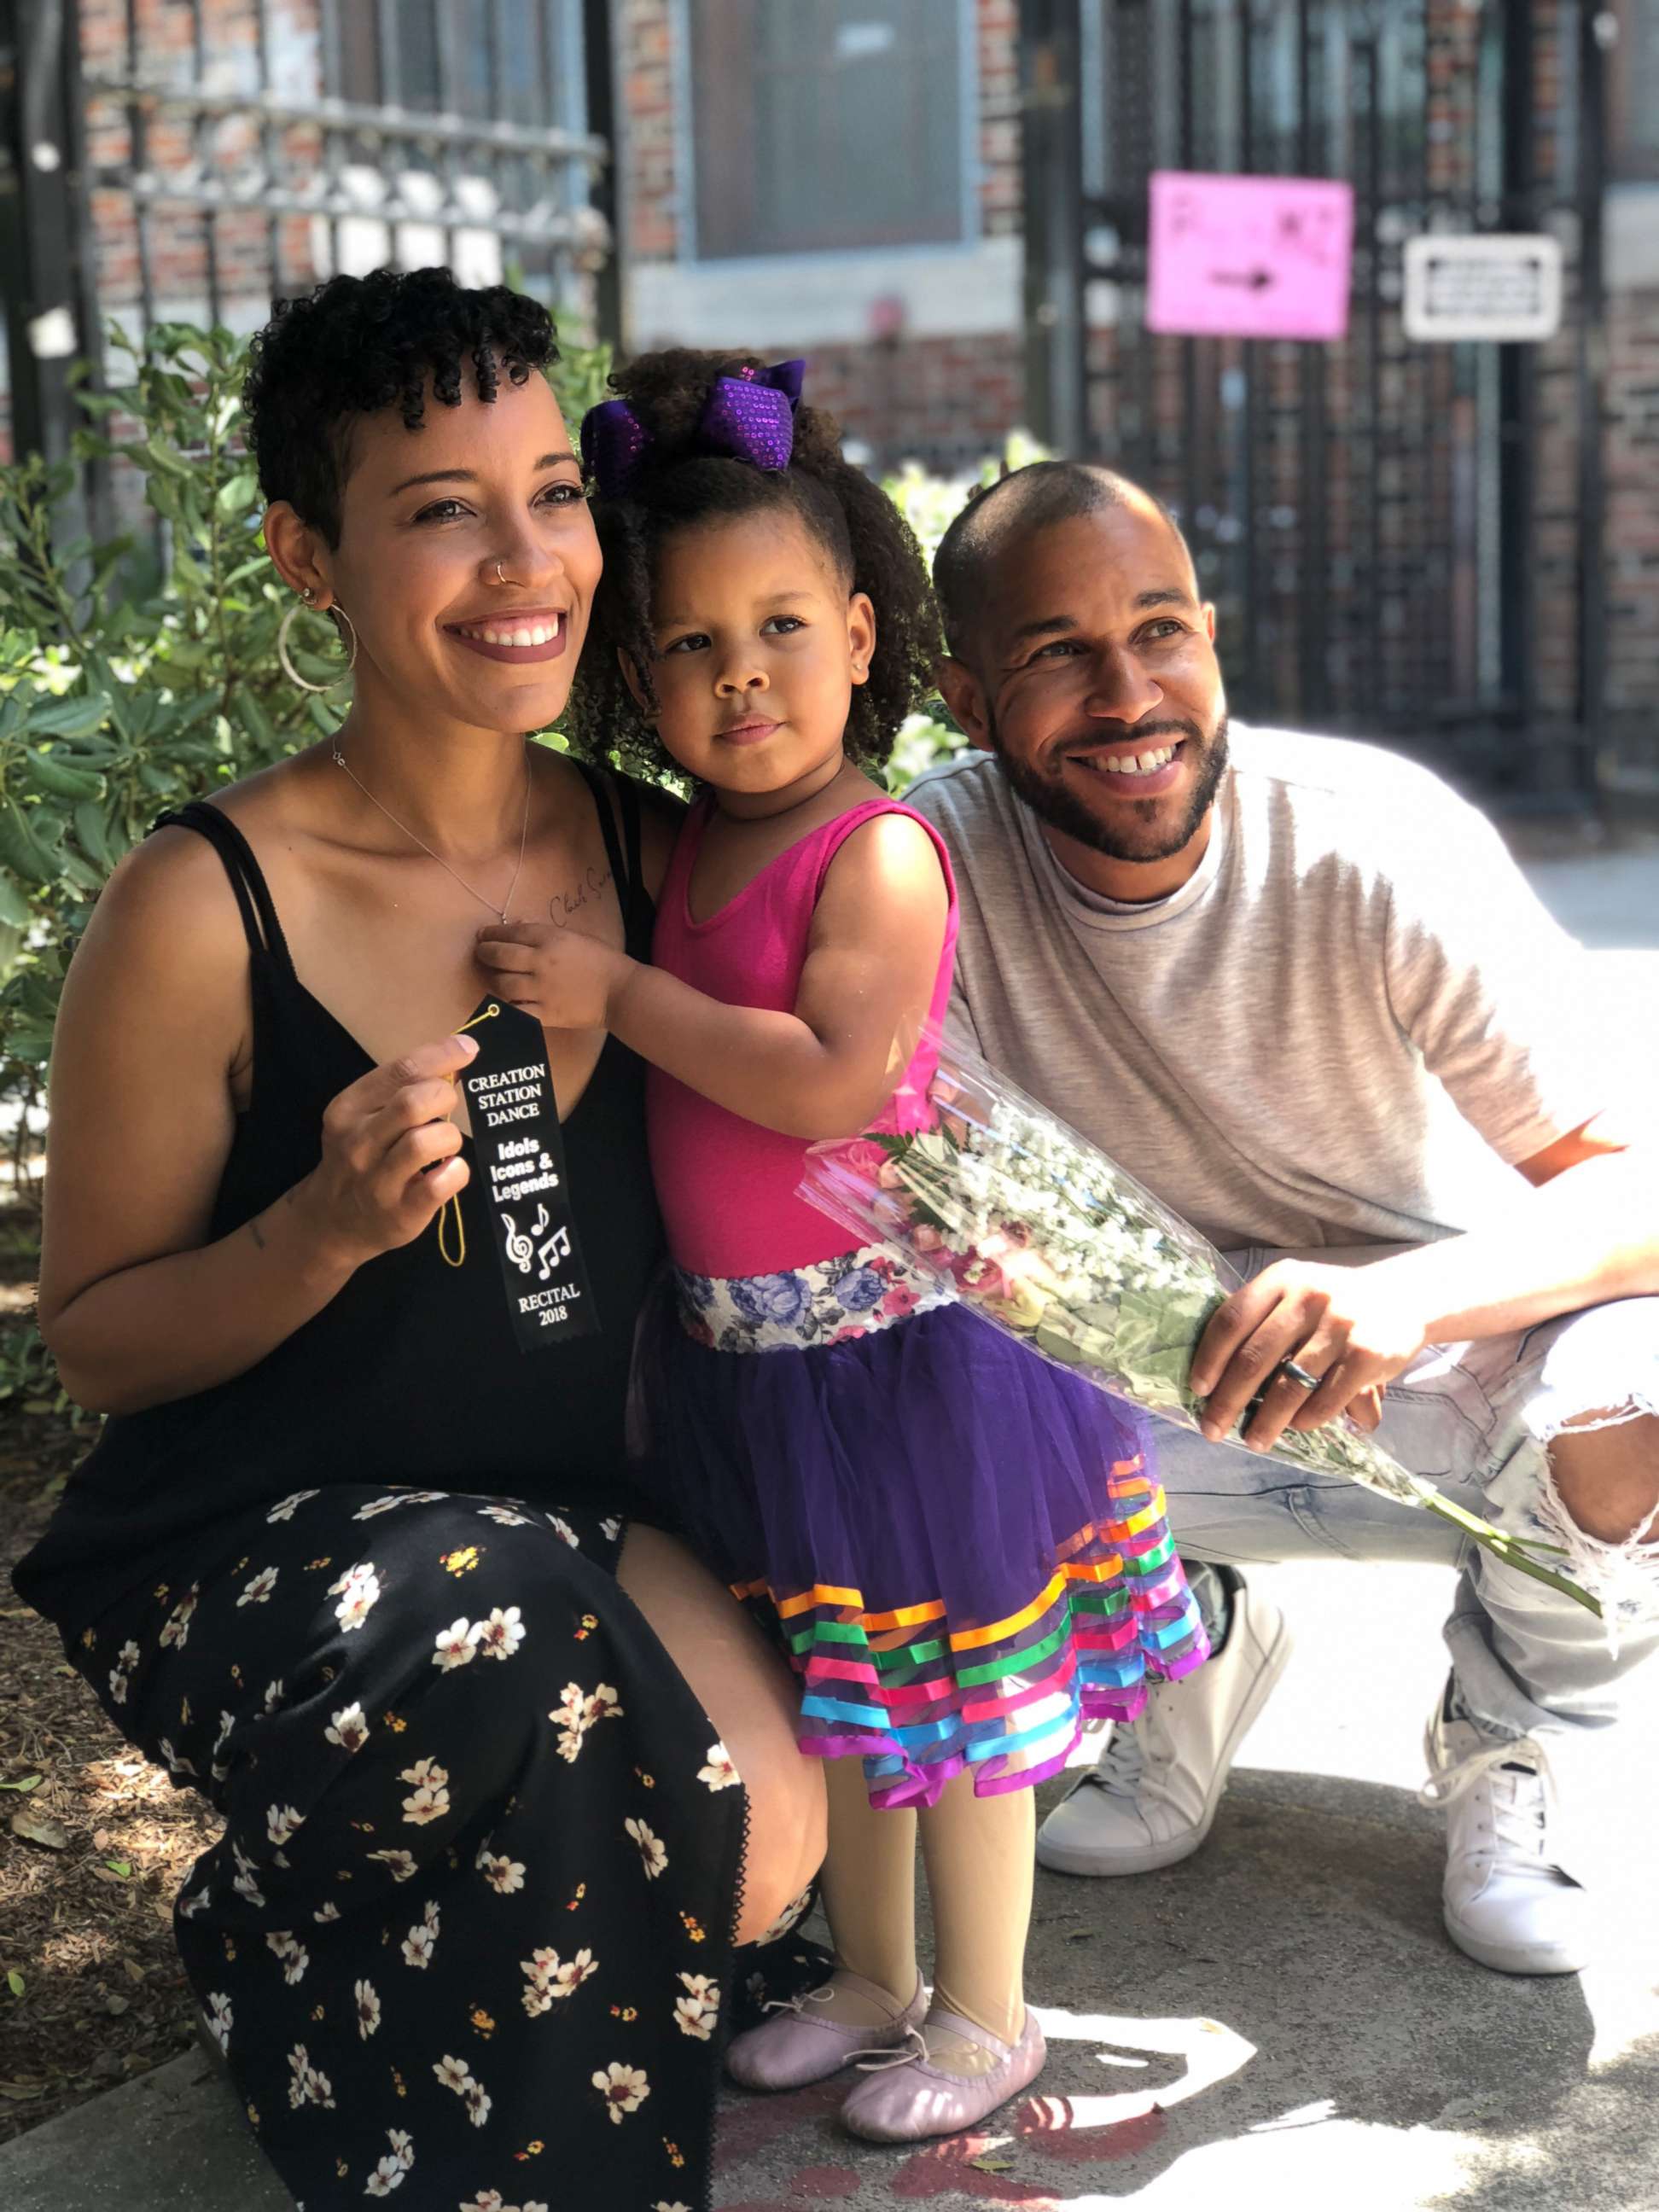 PHOTO: Aaron White, Los Angeles based at-risk youth advocate, is committed to building a long-lasting bond with his daughter .